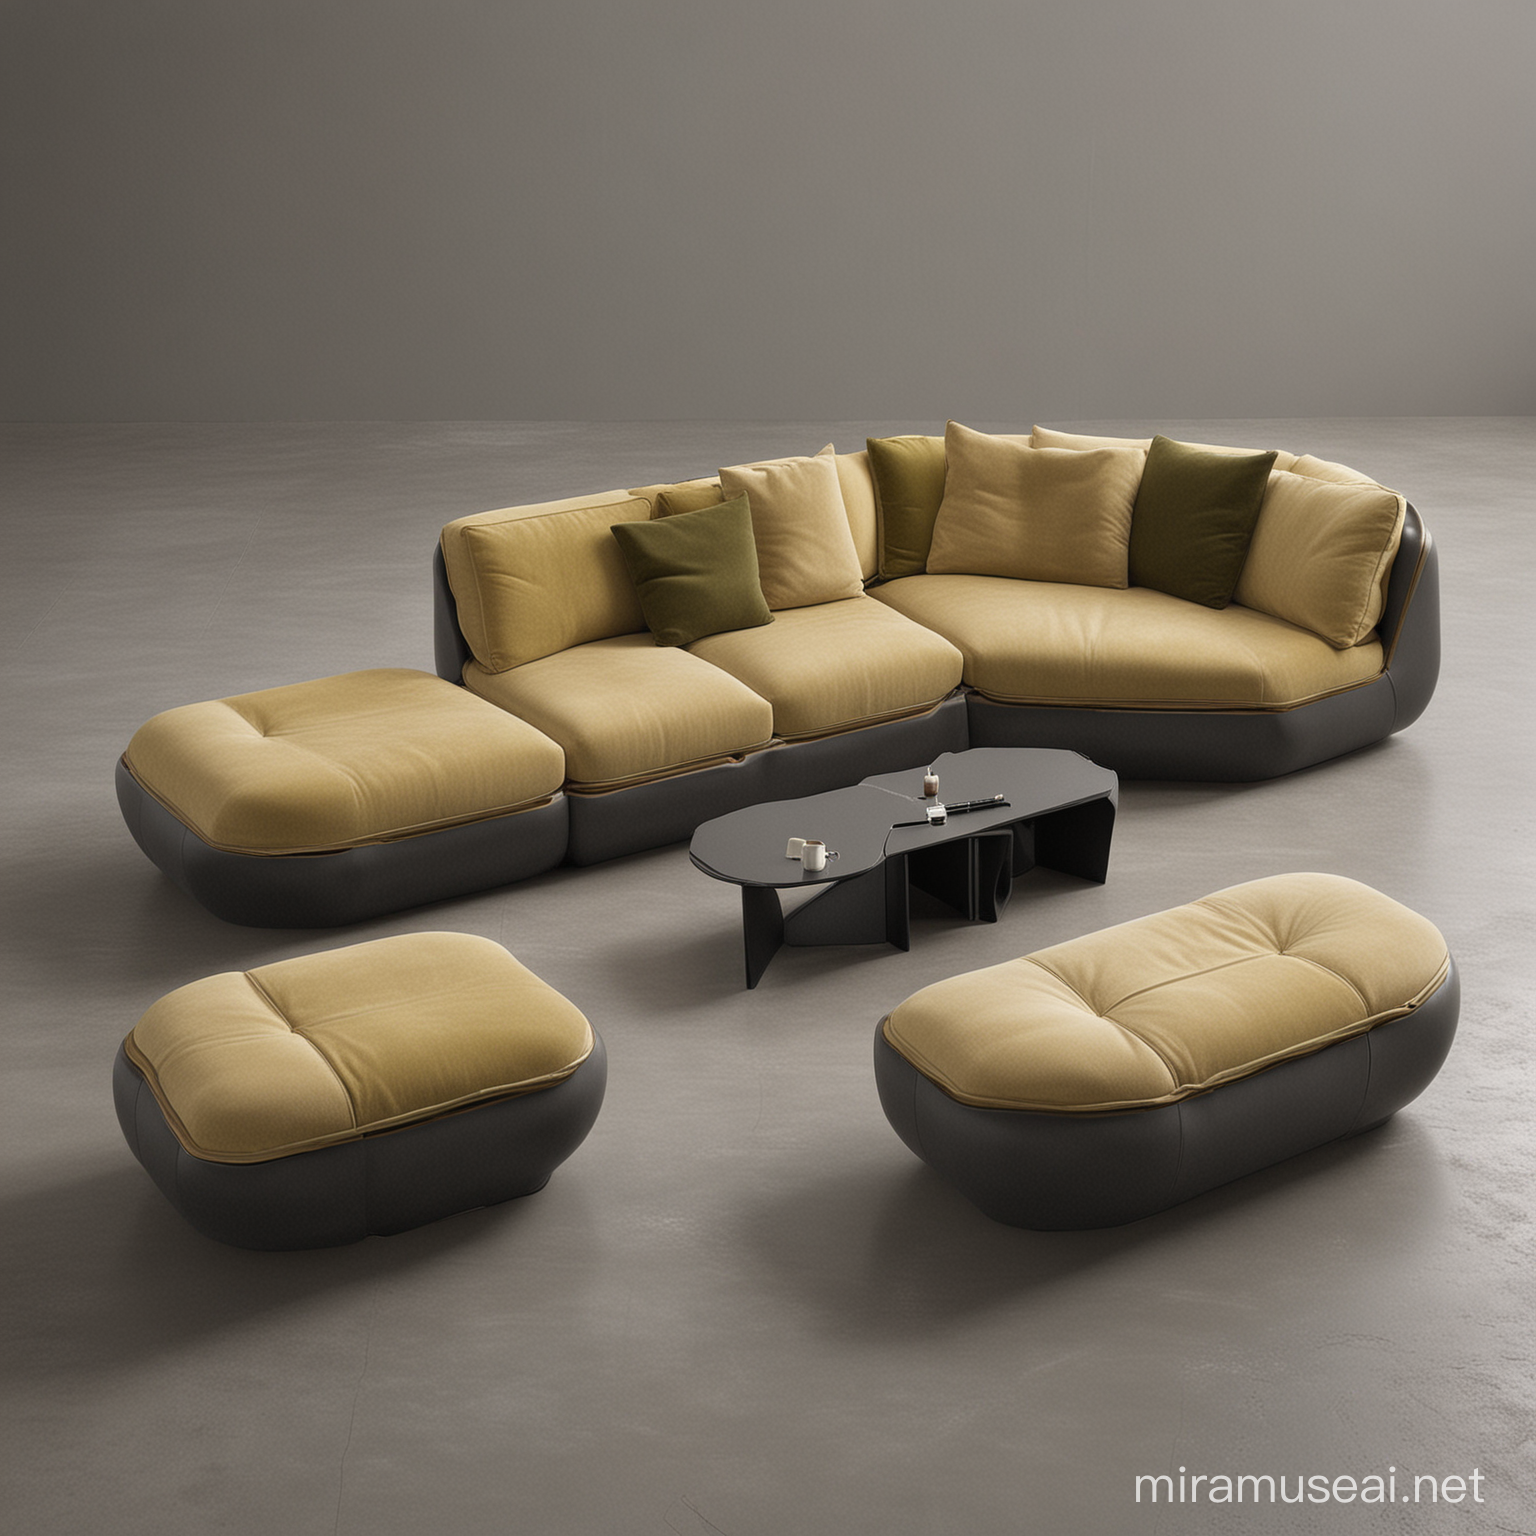 Futuristic Modular Sectional Sofa Set in Dark Gray Fabric and Olive OilColored Terry Cloth